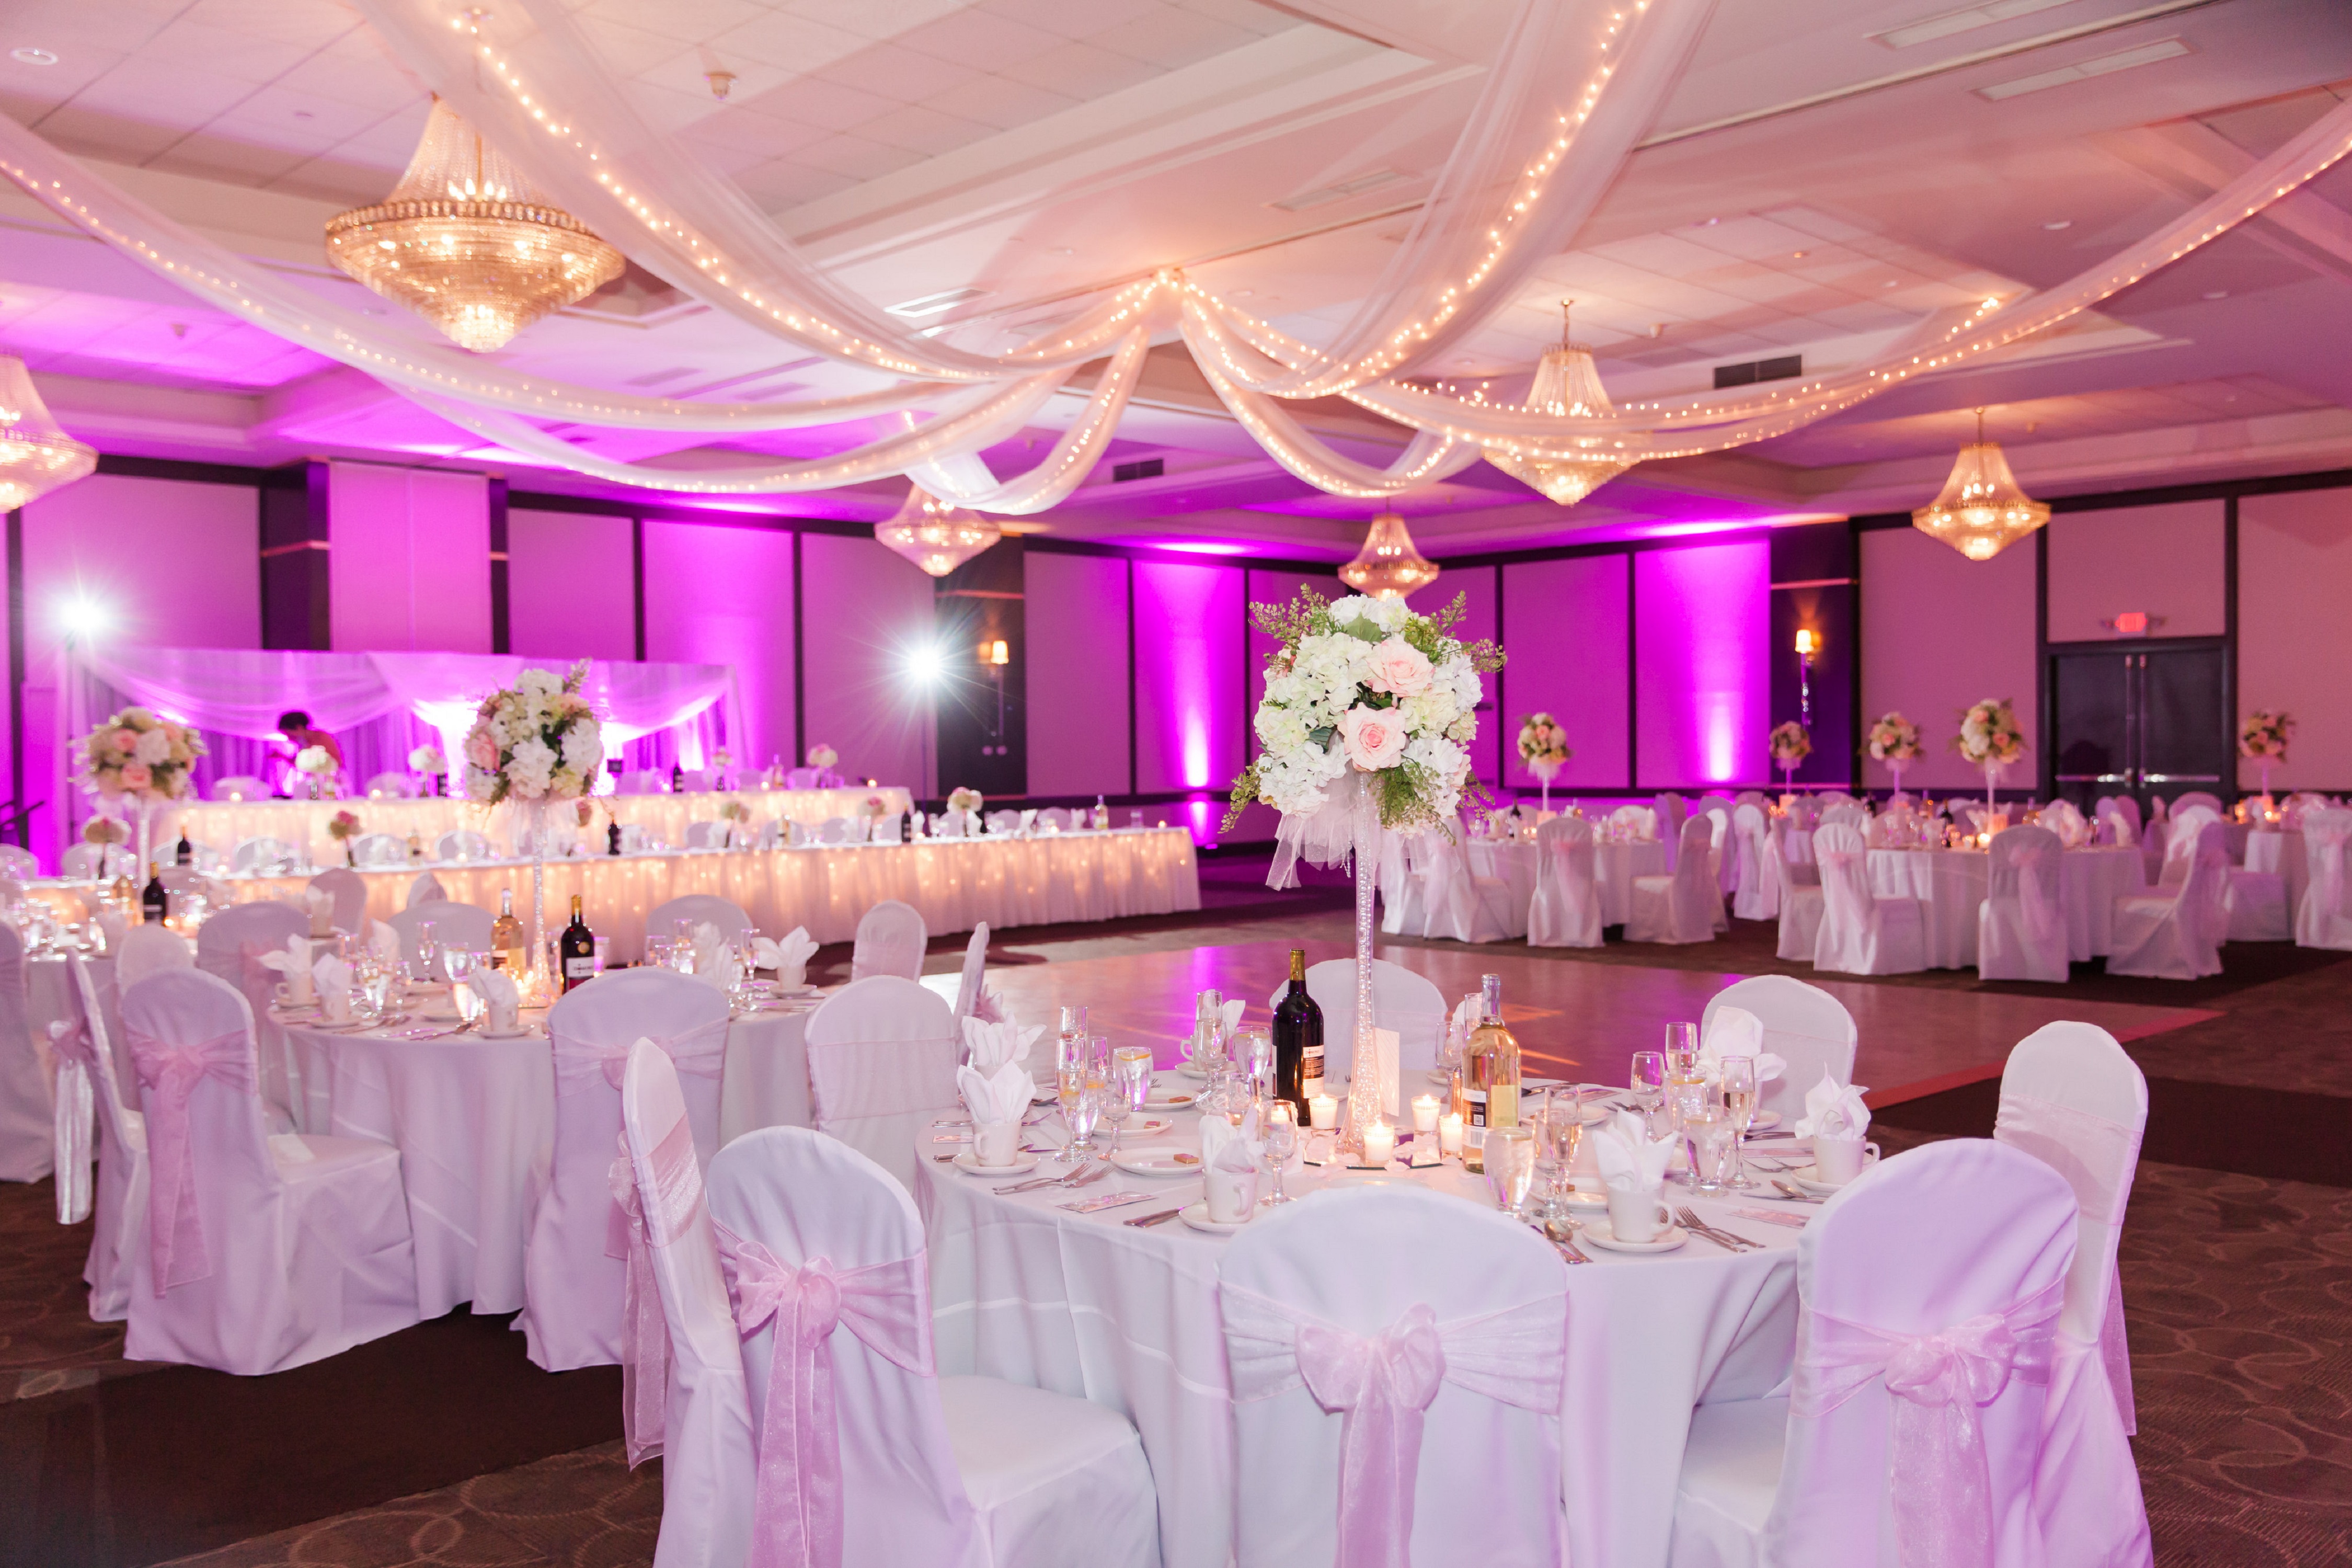 Ballroom With Pink Lighting, Place Settings, Flowers, Candles and Wine Bottles on Round Tables With White Tablecloths, and Dance Floor Set Up for Wedding Reception